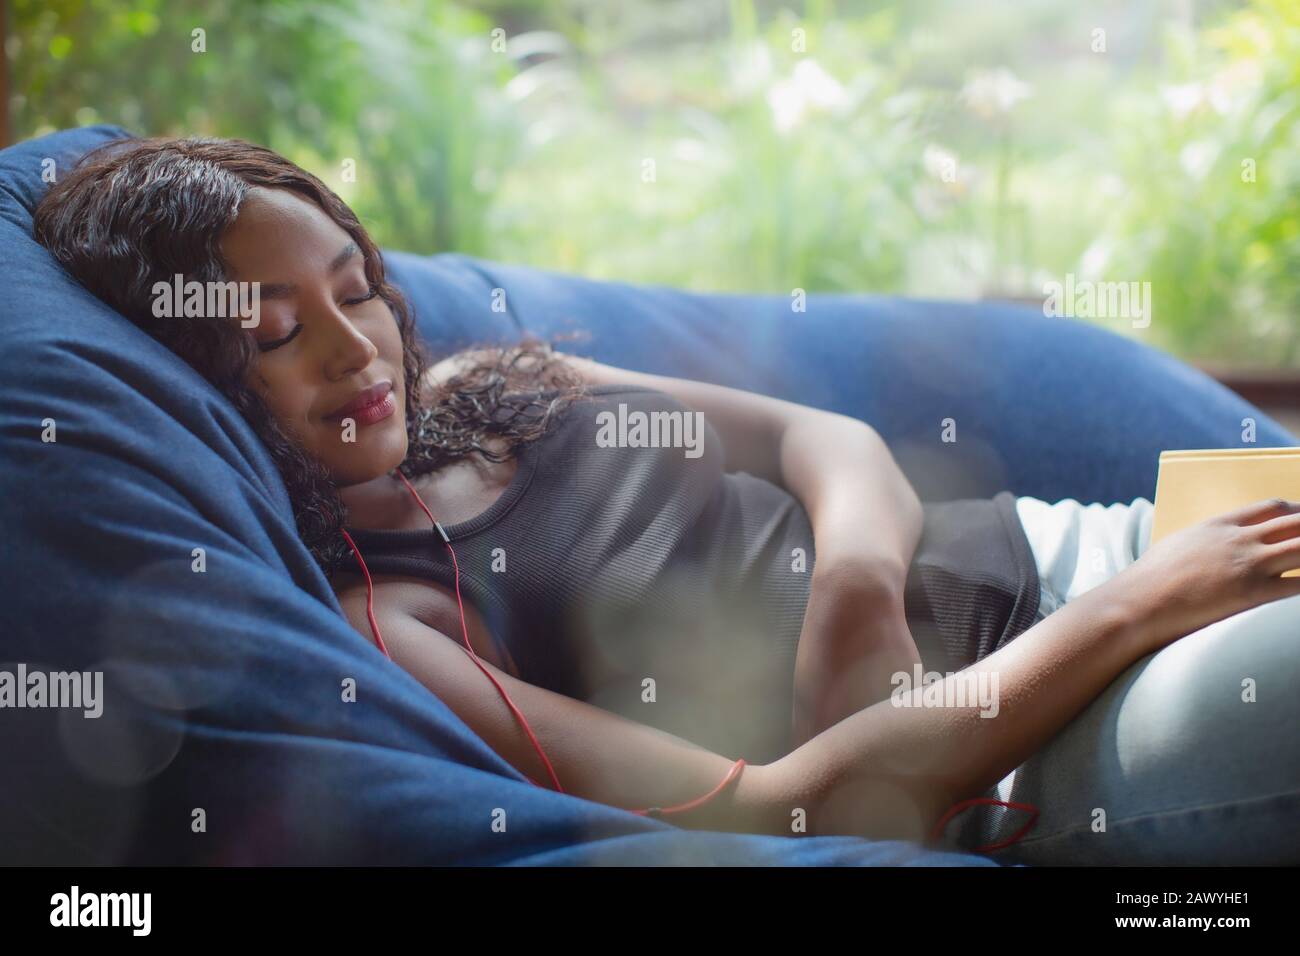 Serene young woman with headphones listening to music in beanbag chair Stock Photo